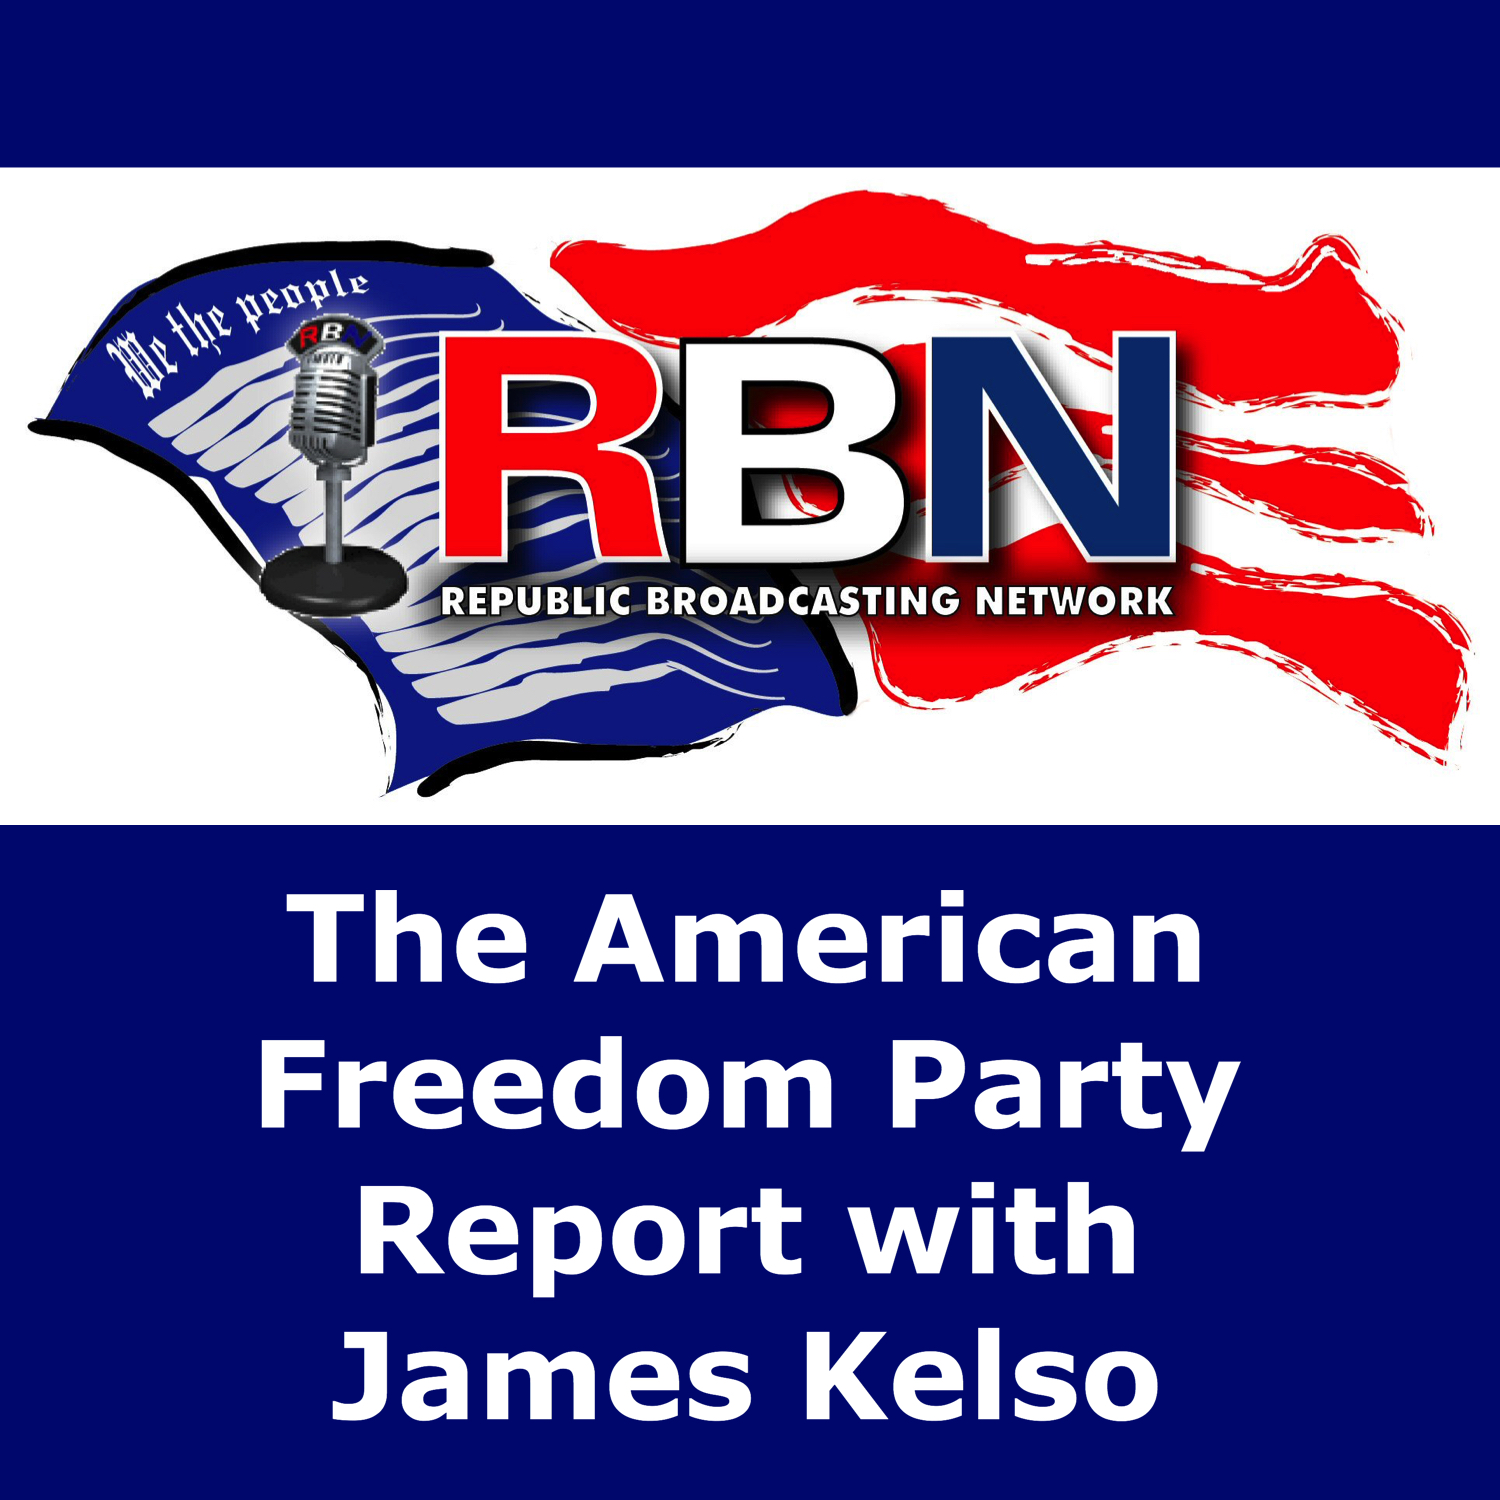 The American Freedom Party Report with James Kelso